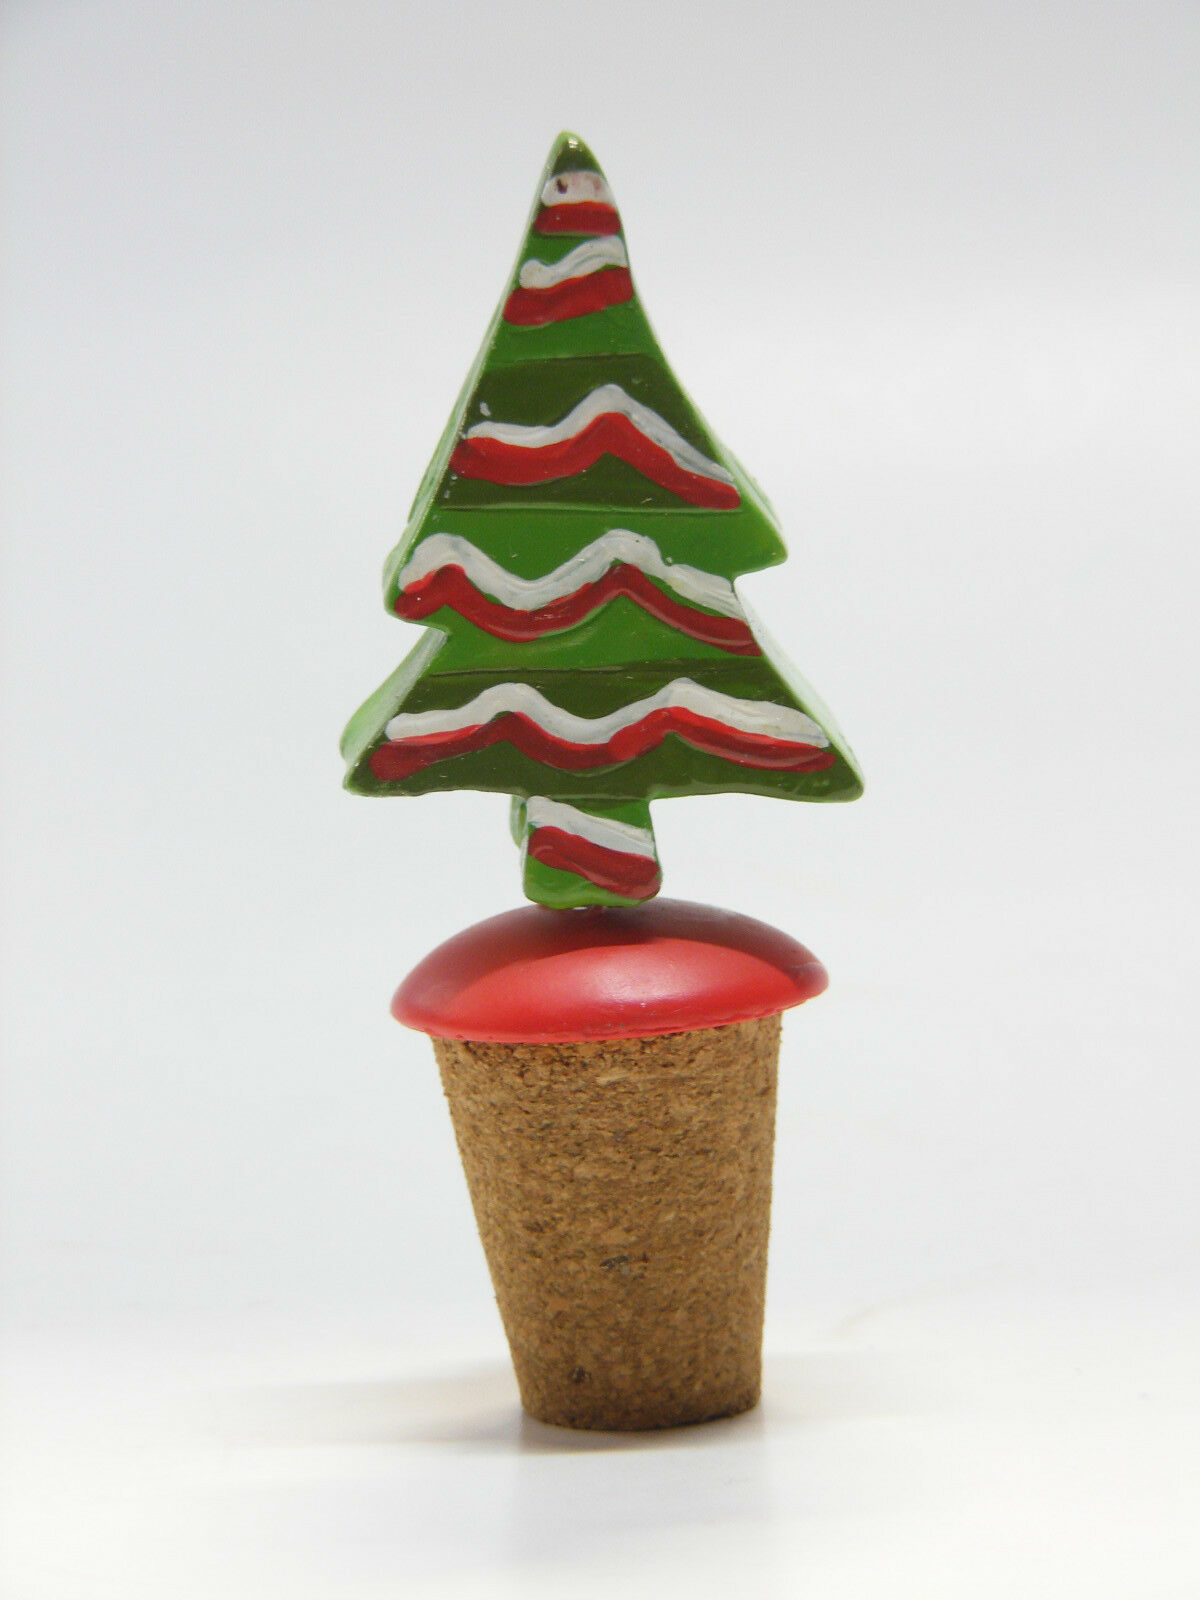 CHRISTMAS TREE ON SPRING WINE BOTTLE STOPPER CHRISTMAS ACCESSORY - $8.88